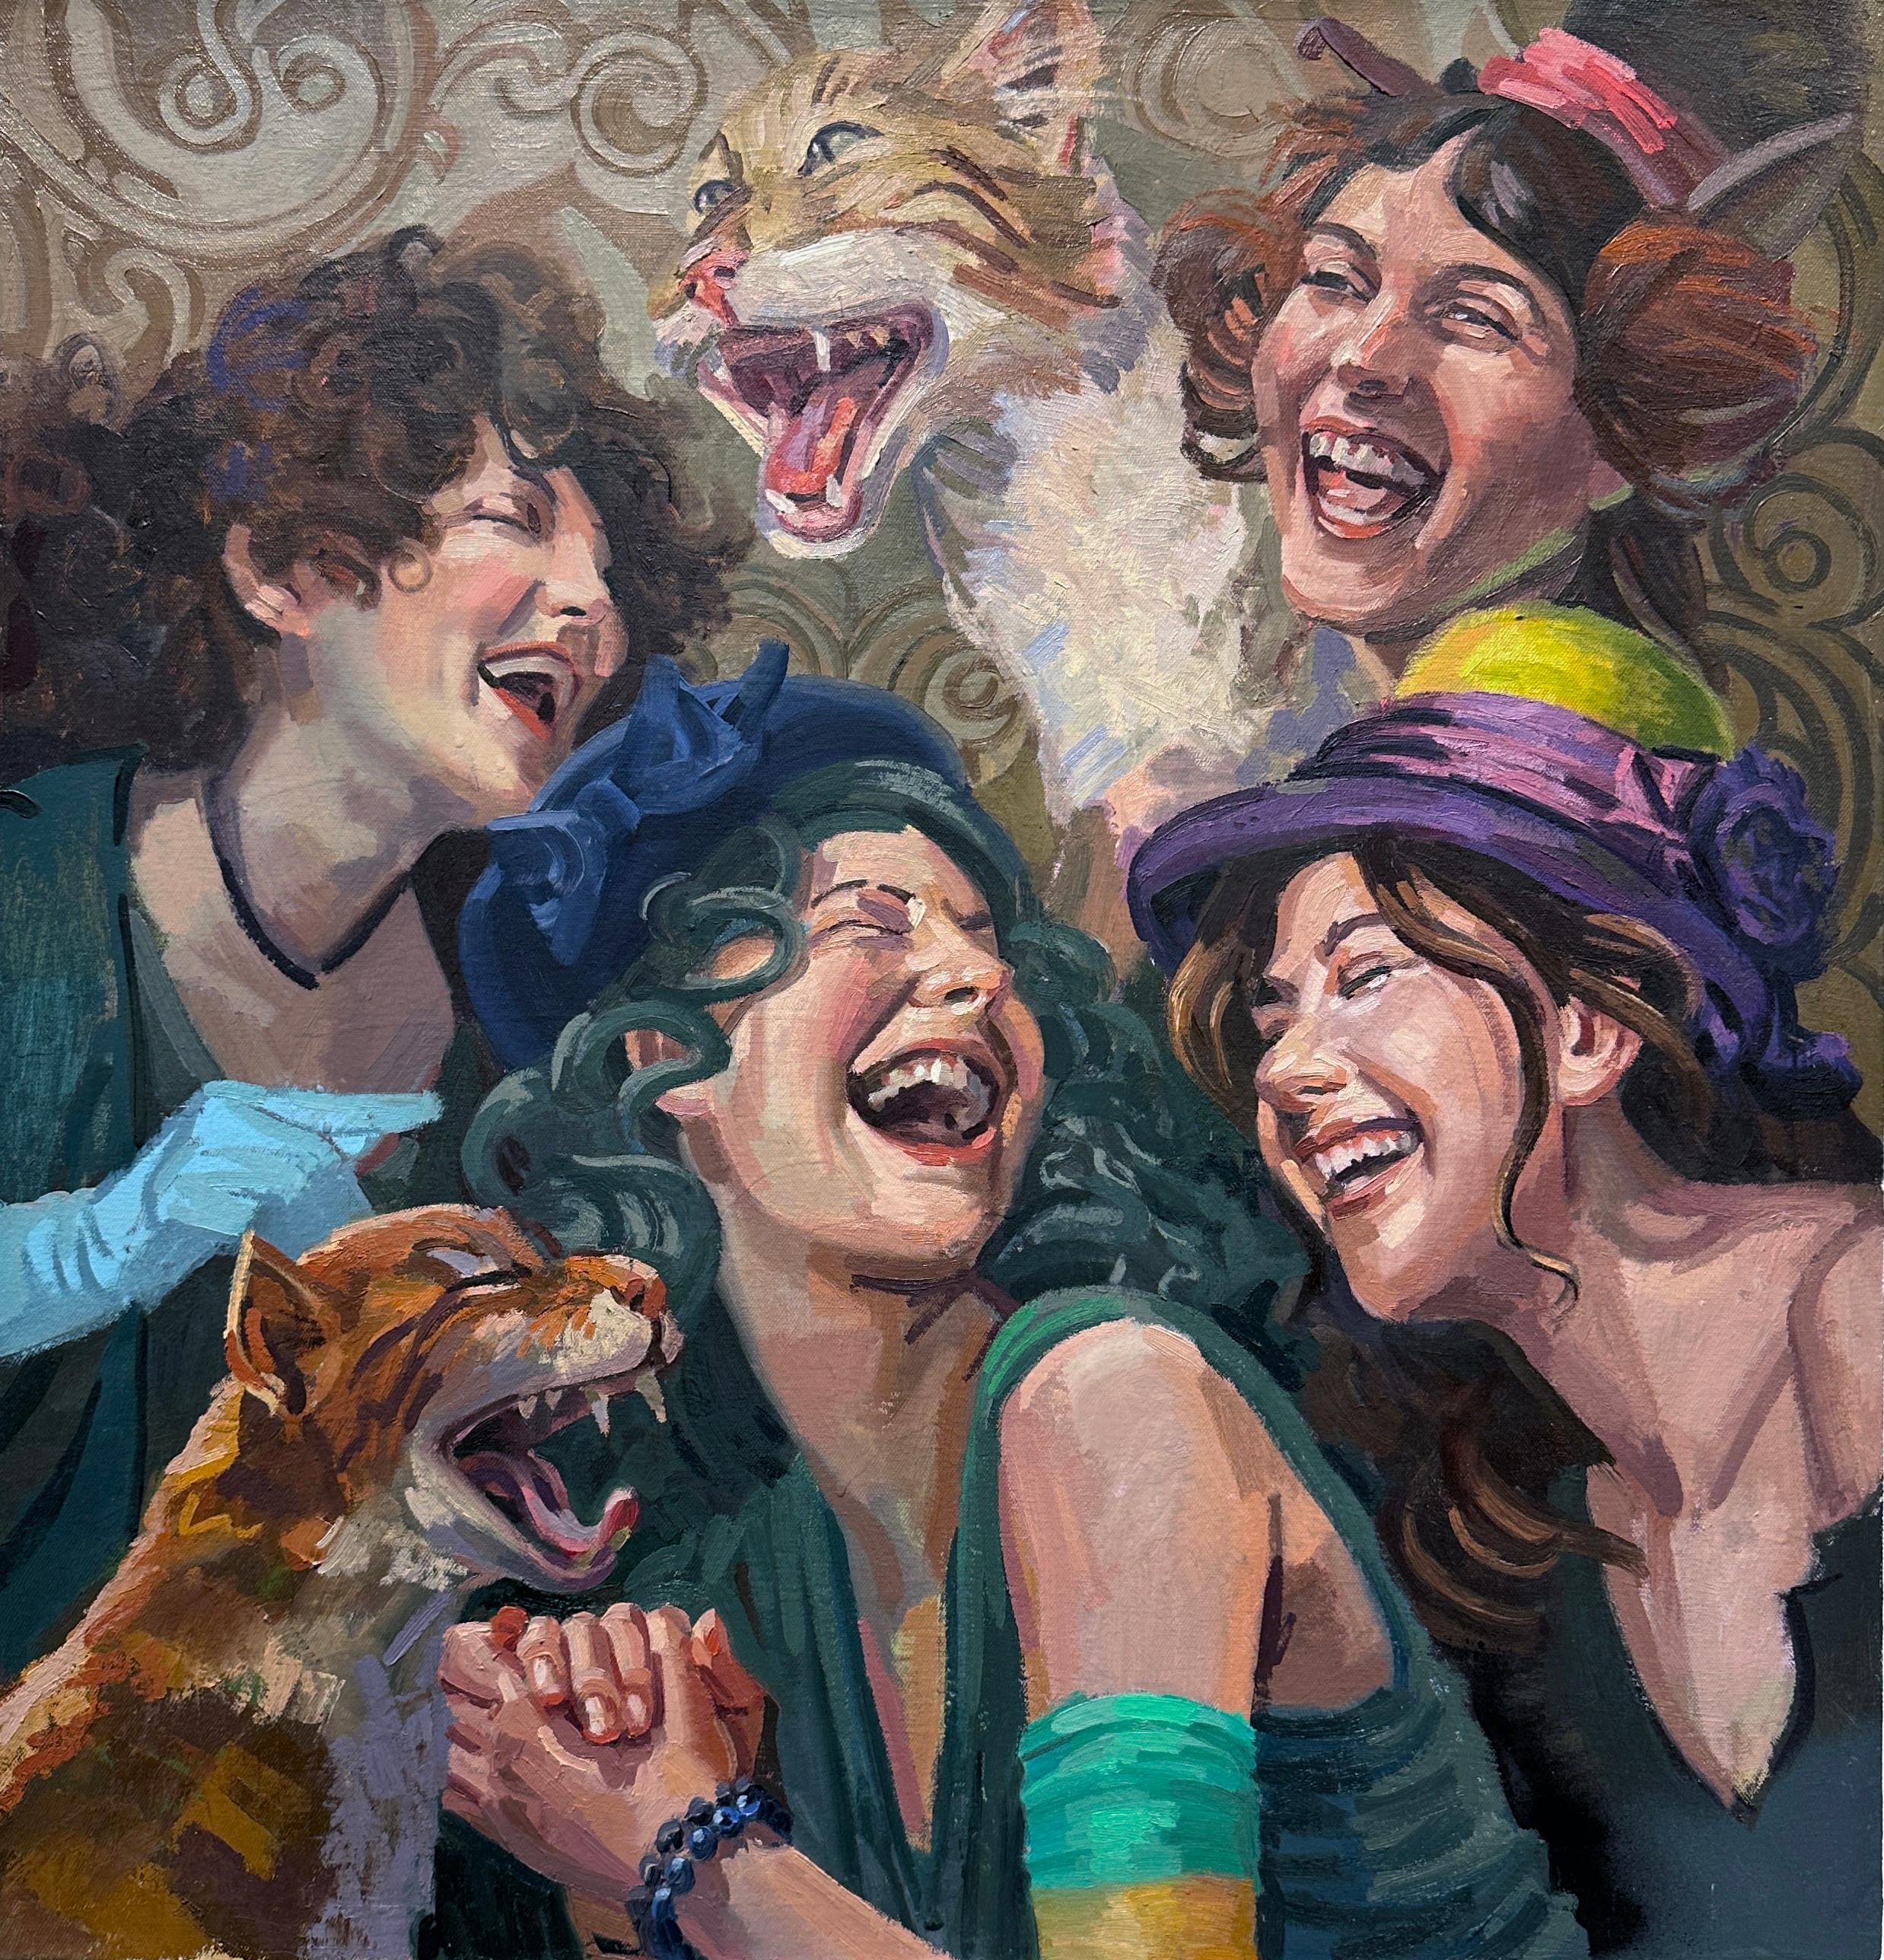 Benjamin Duke Figurative Painting - Hysterical Kats - Scene with Laughing Cats and Well Dressed Women, Original Oil